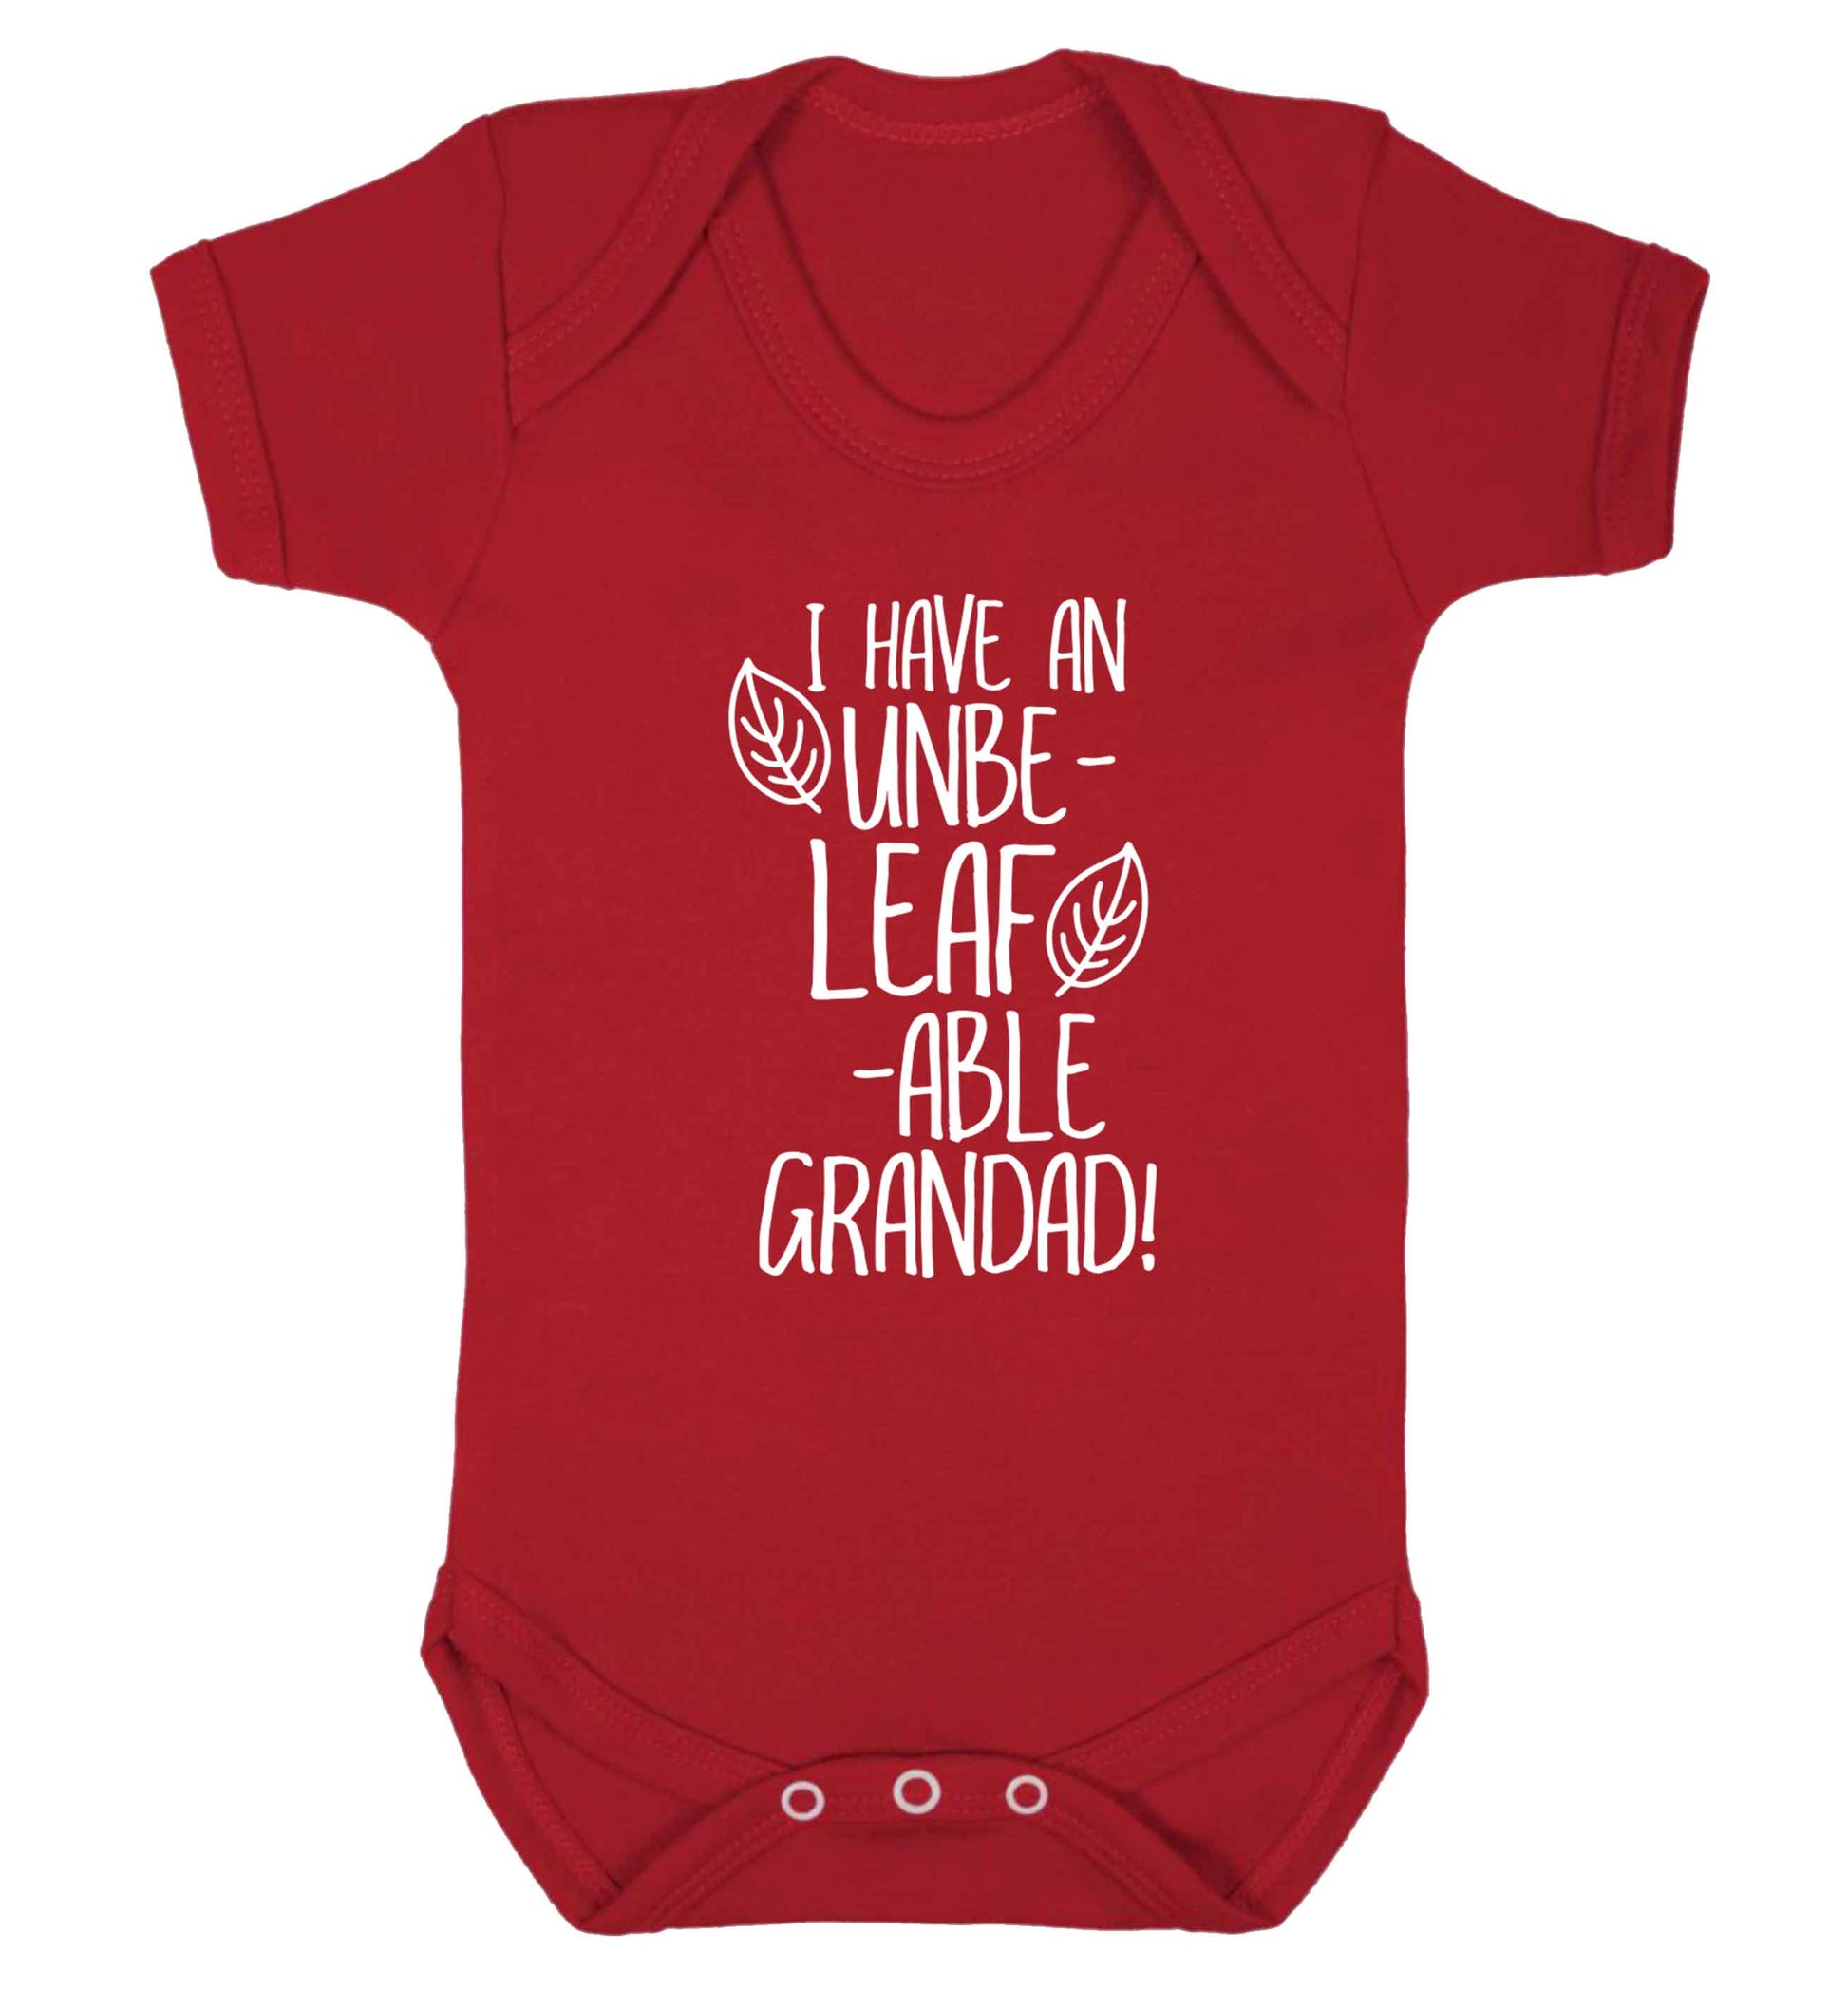 I have an unbe-leaf-able grandad Baby Vest red 18-24 months